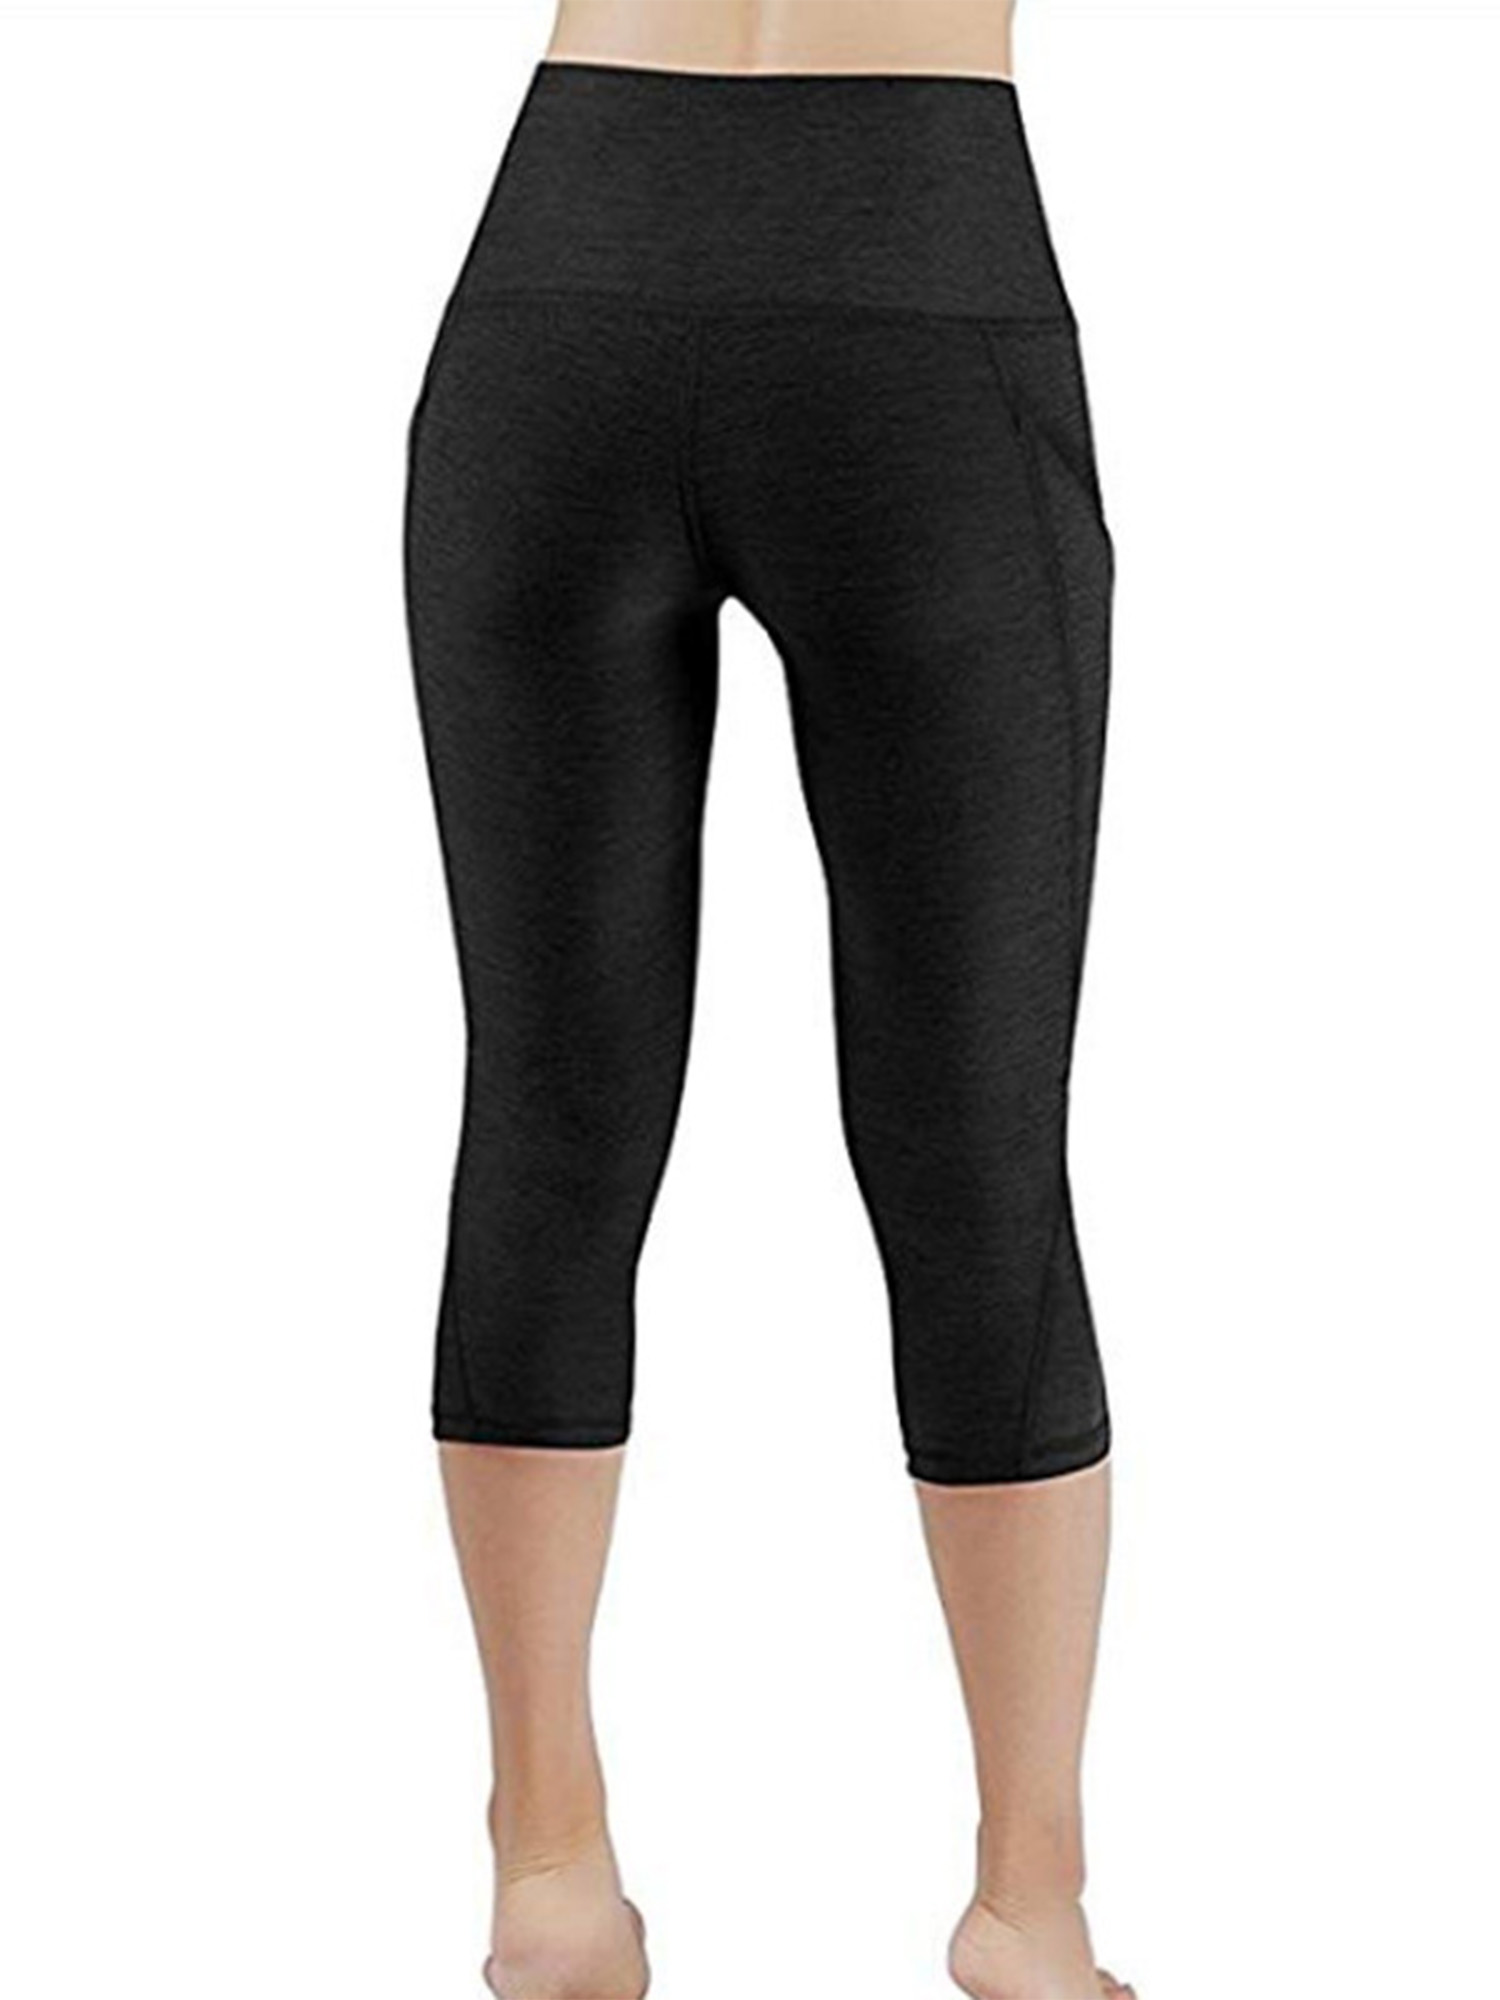 MAWCLOS 2psc Women Capri Leggings Tights Tummy Conytol High Waist Cropped Yoga Pants for Running Fitness with Pocket - image 6 of 8